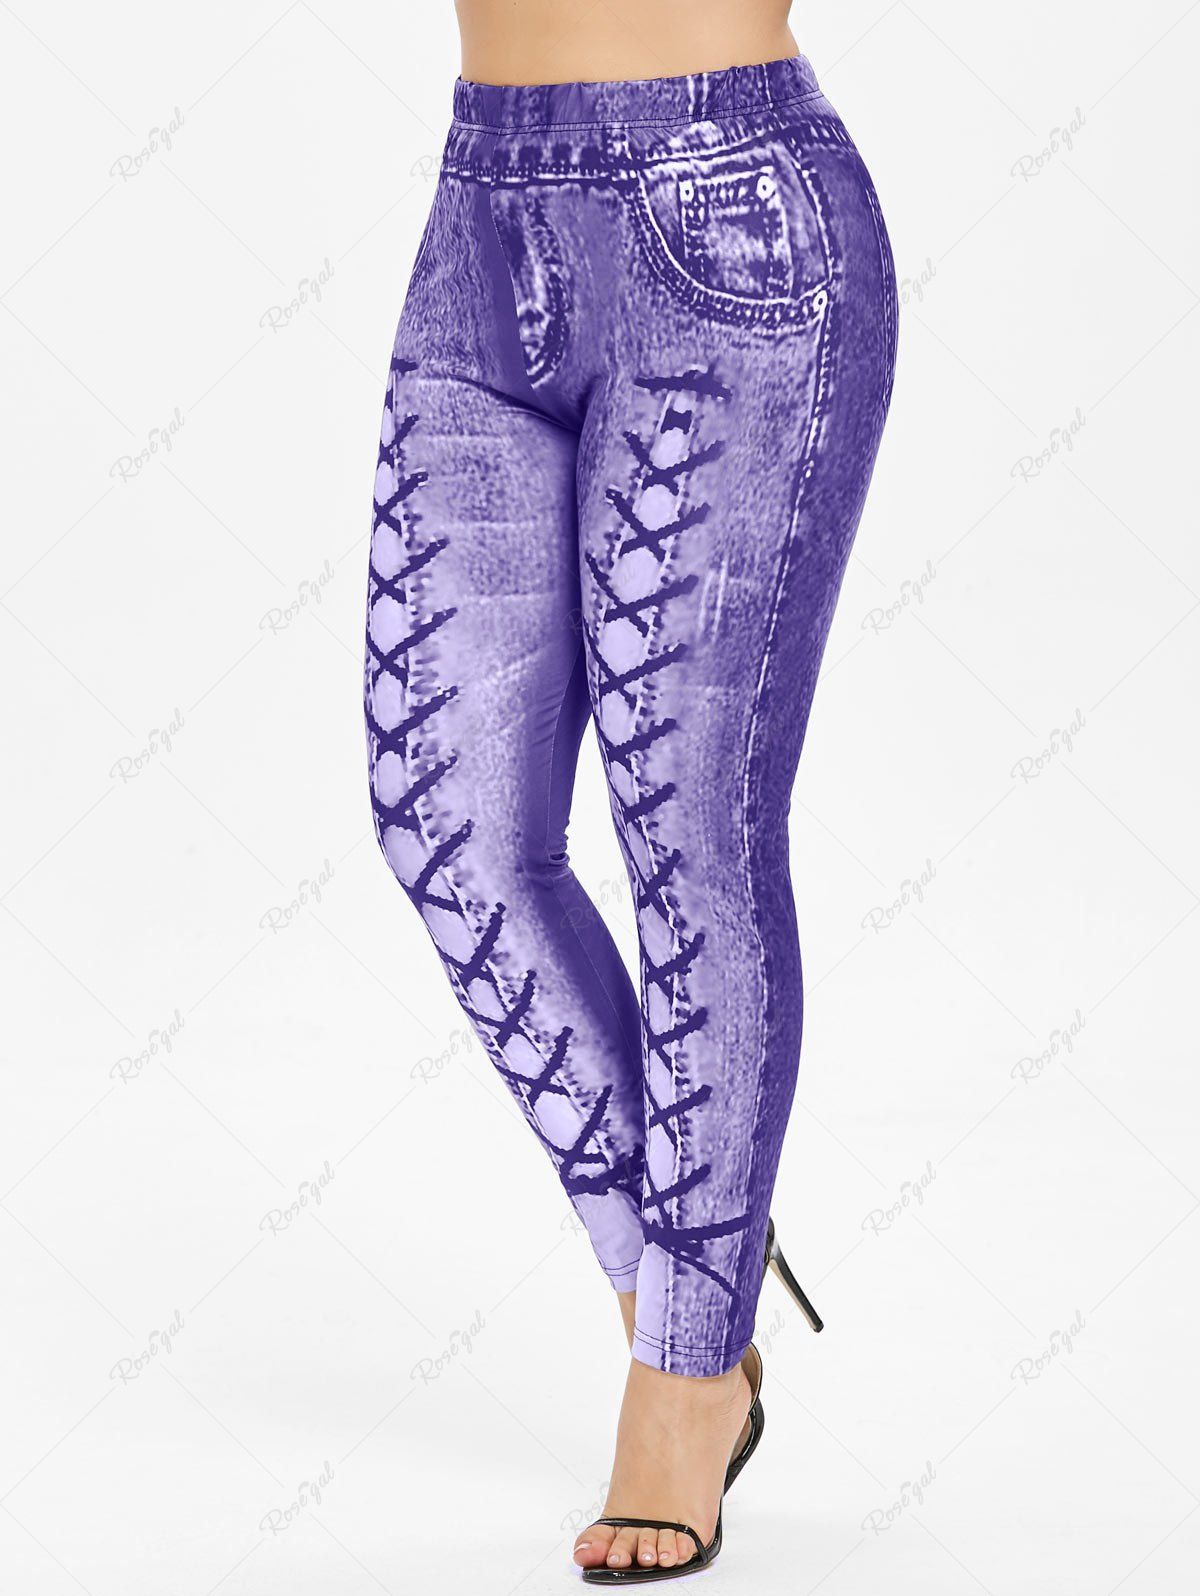 Plus Size High Waisted 3D Printed Leggings